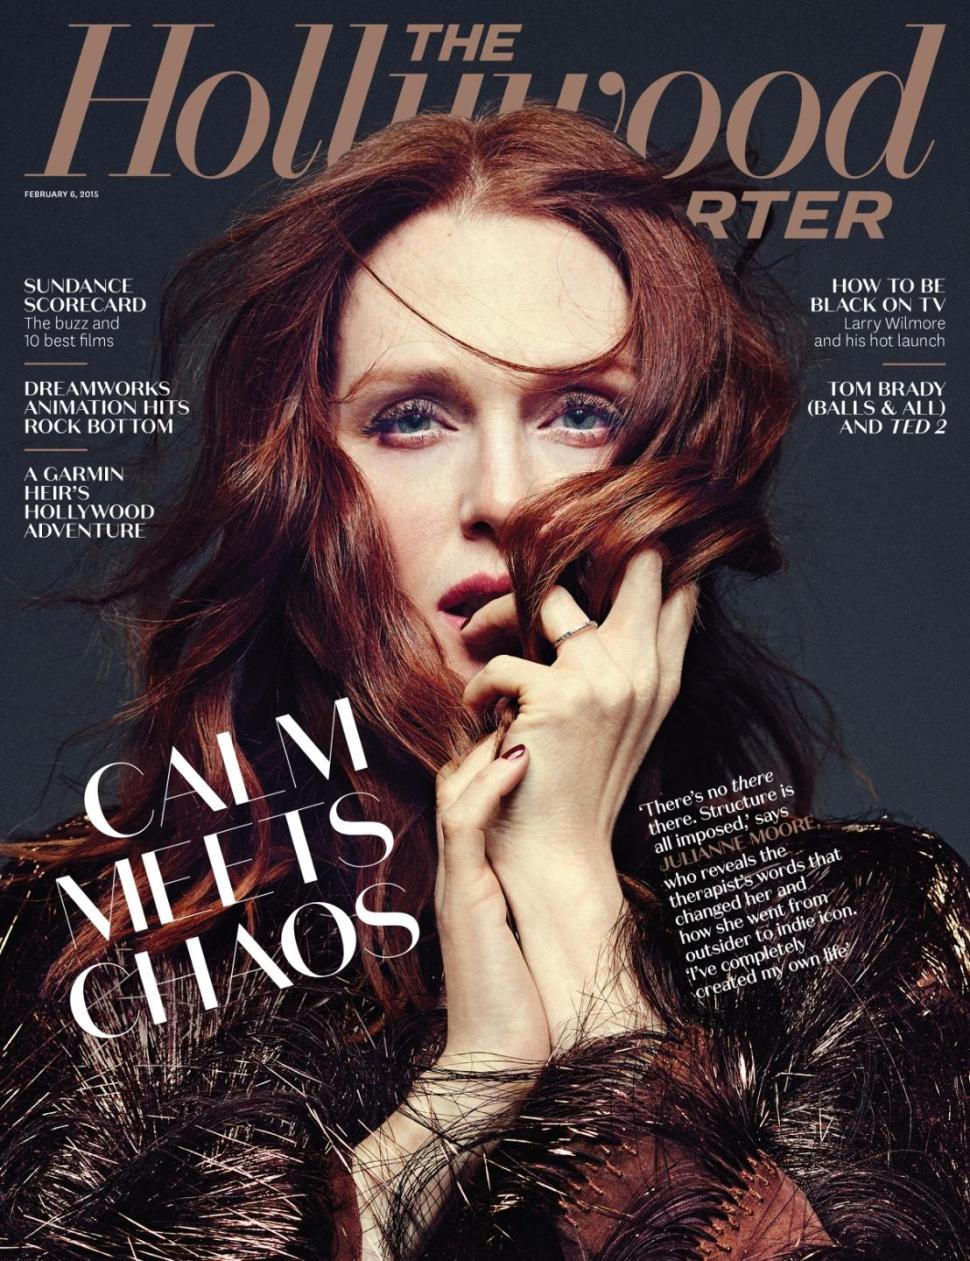 Julianne Moore on the cover of the Feb. 6 issue of The Hollywood Reporter.